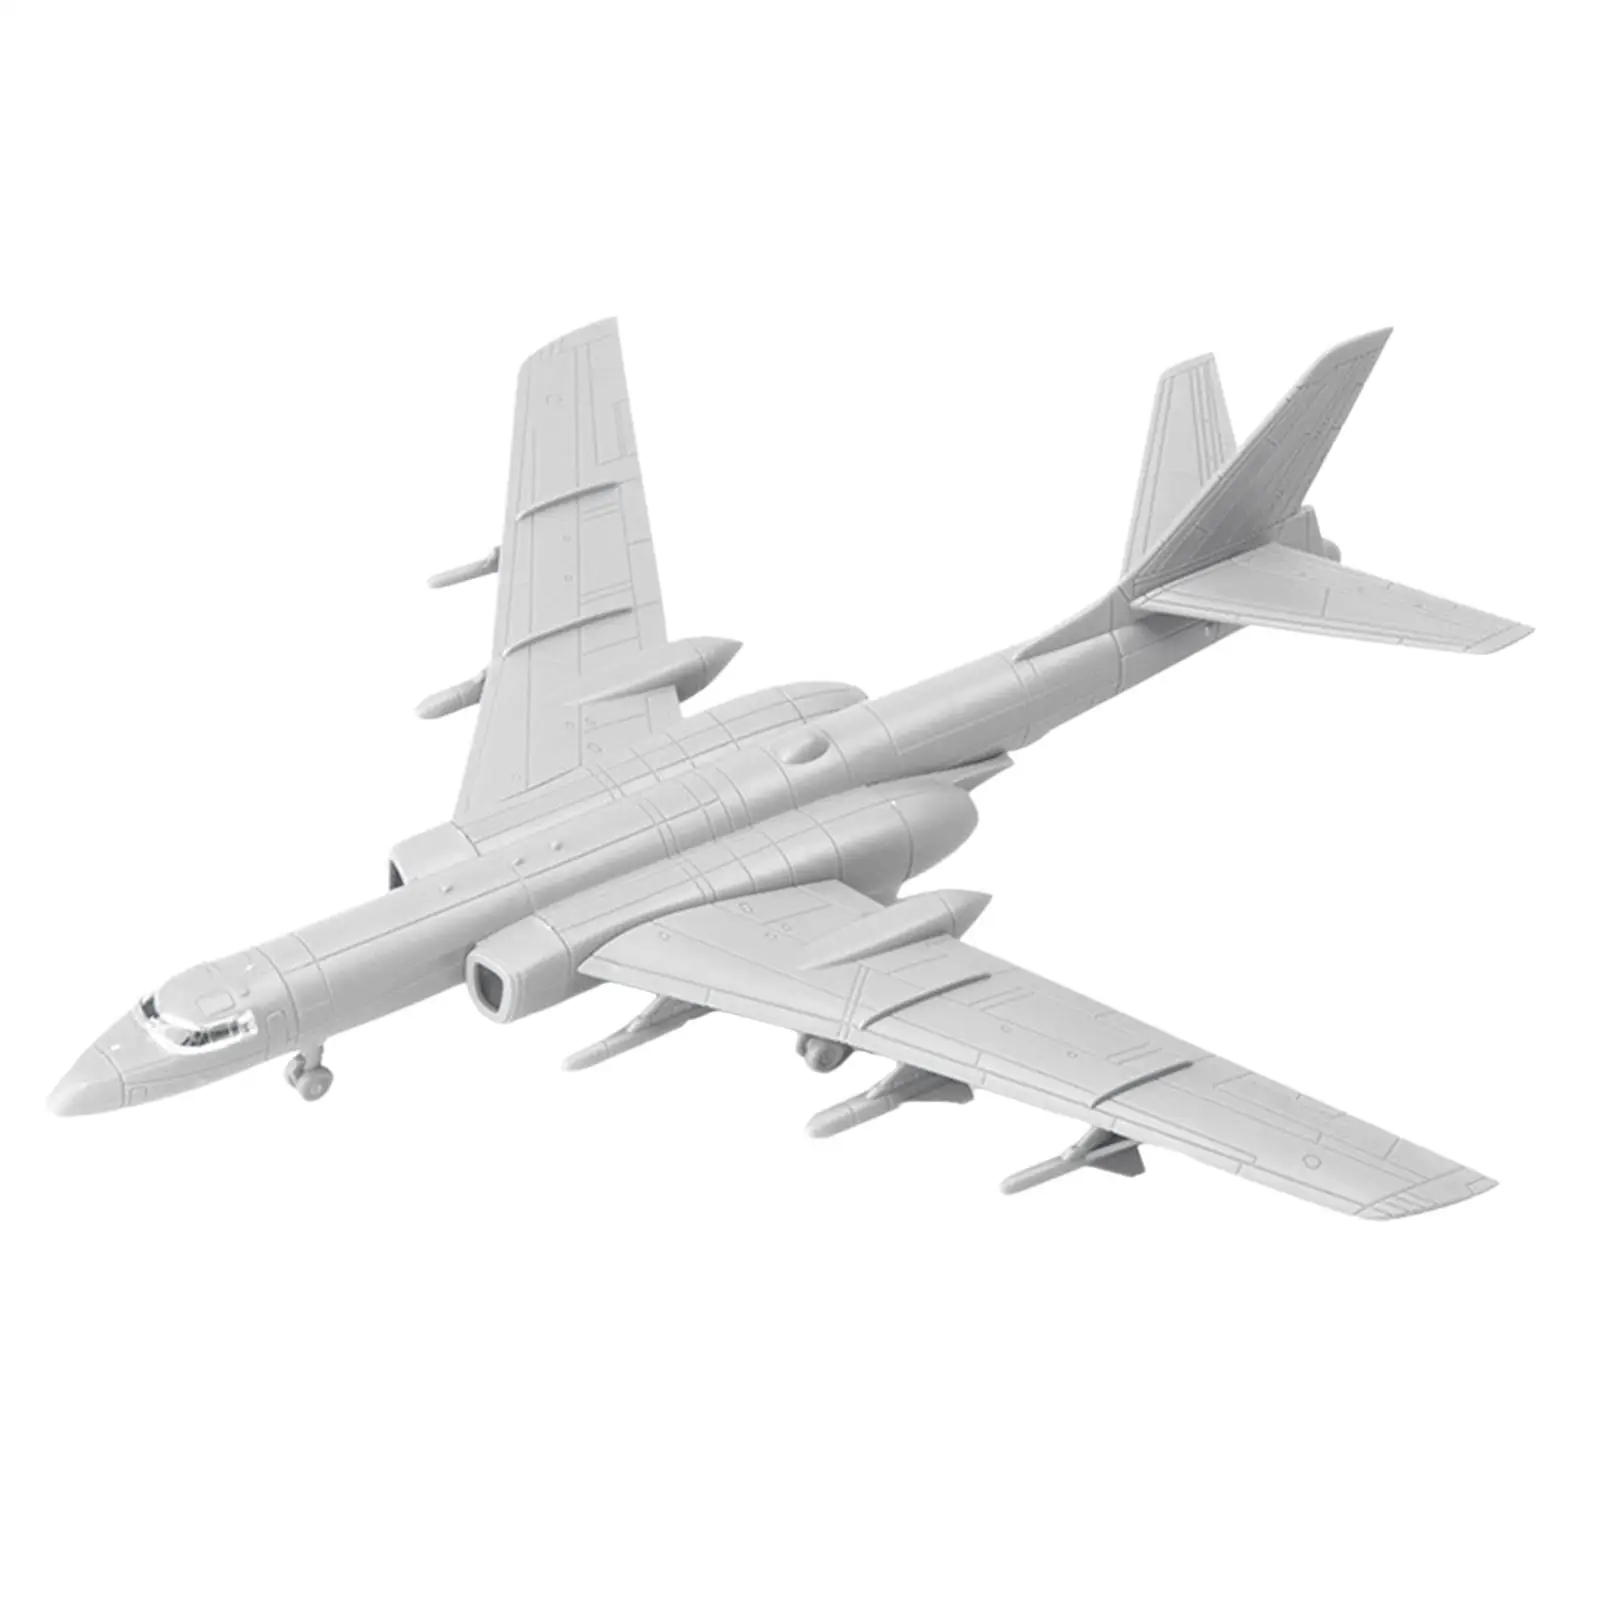 Fighter Model toys 1:144 Scale Simulation Ornament DIY 4D Chinese H6K Plane Model for Living Room Home Desktop Accessory Gift